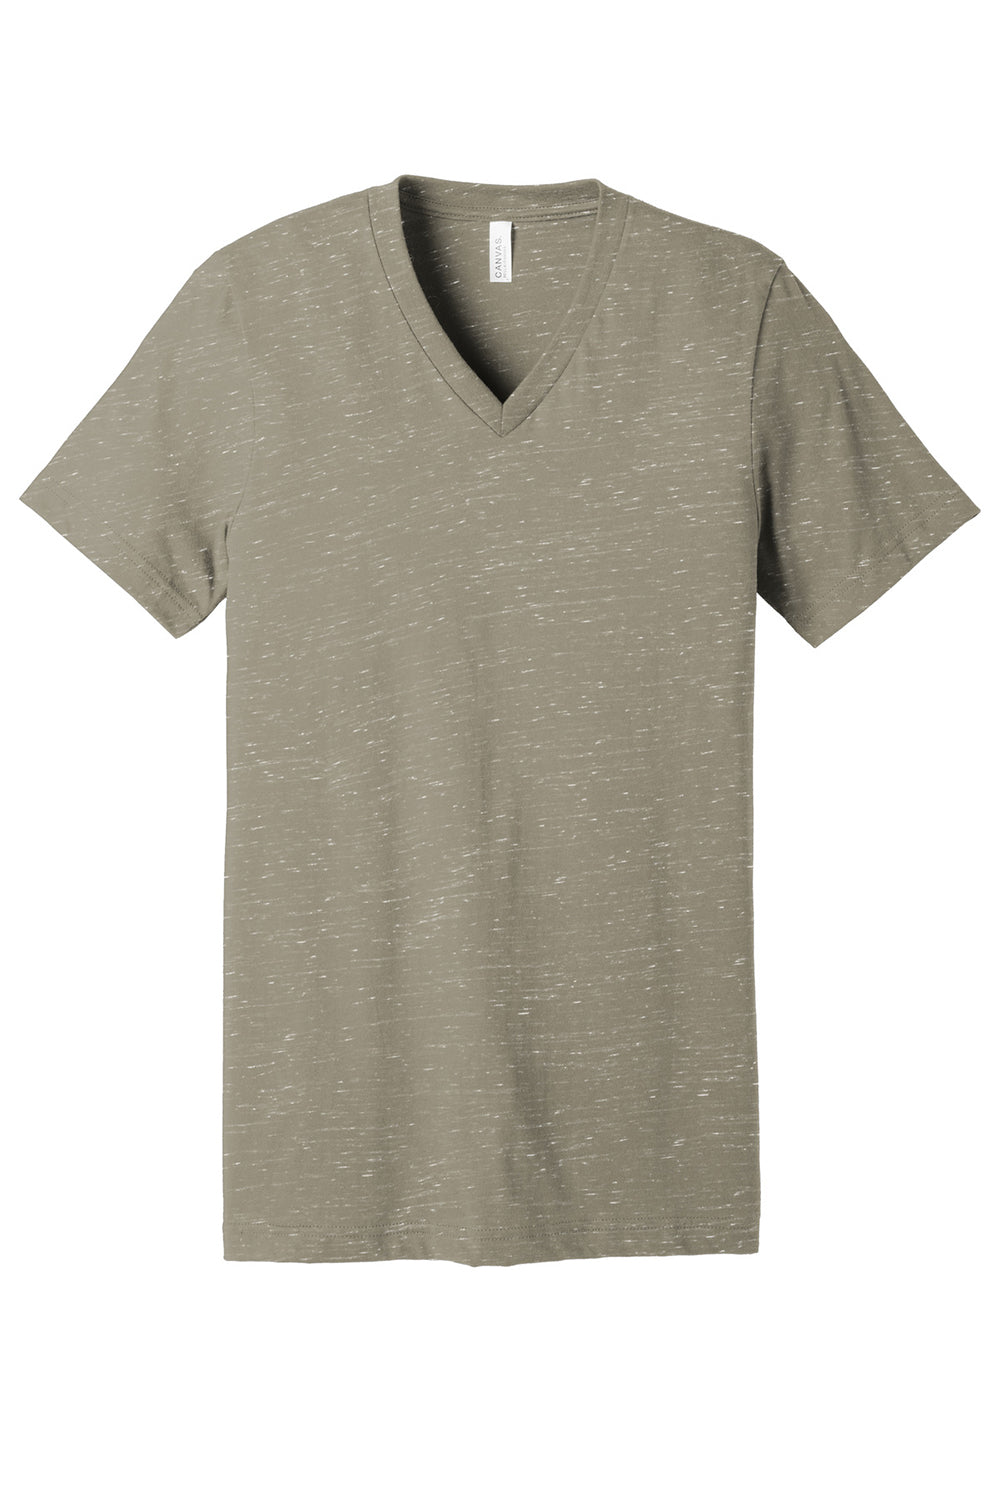 Bella + Canvas BC3655/3655C Mens Textured Jersey Short Sleeve V-Neck T-Shirt Stone Marble Flat Front